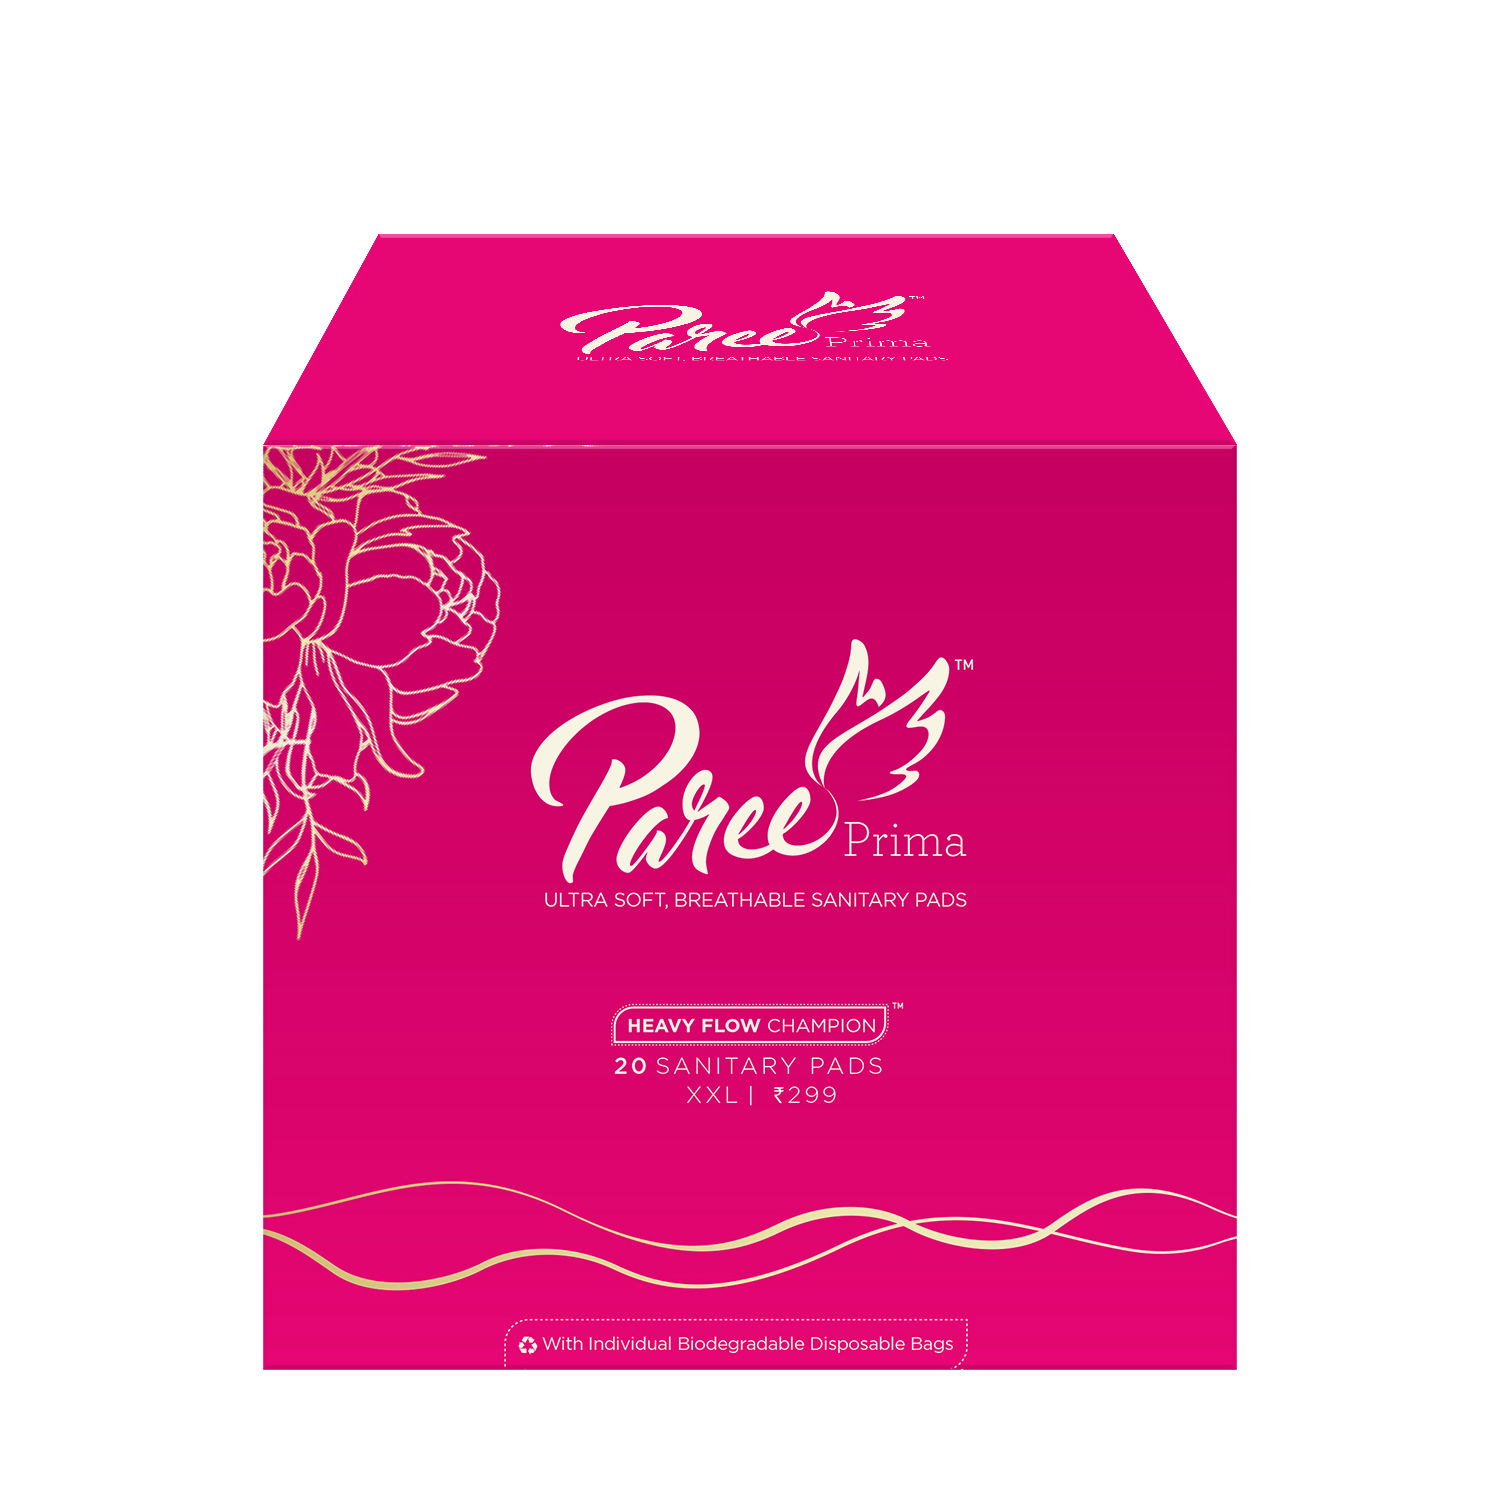 Buy Paree Prima Premium Ultra Soft Sanitary Pads for Women with Breathable Back Sheet And Super Soft Top Sheet for Heavy Flow, XXL| Biodegradable Disposable Bags, 20 Pads - Purplle